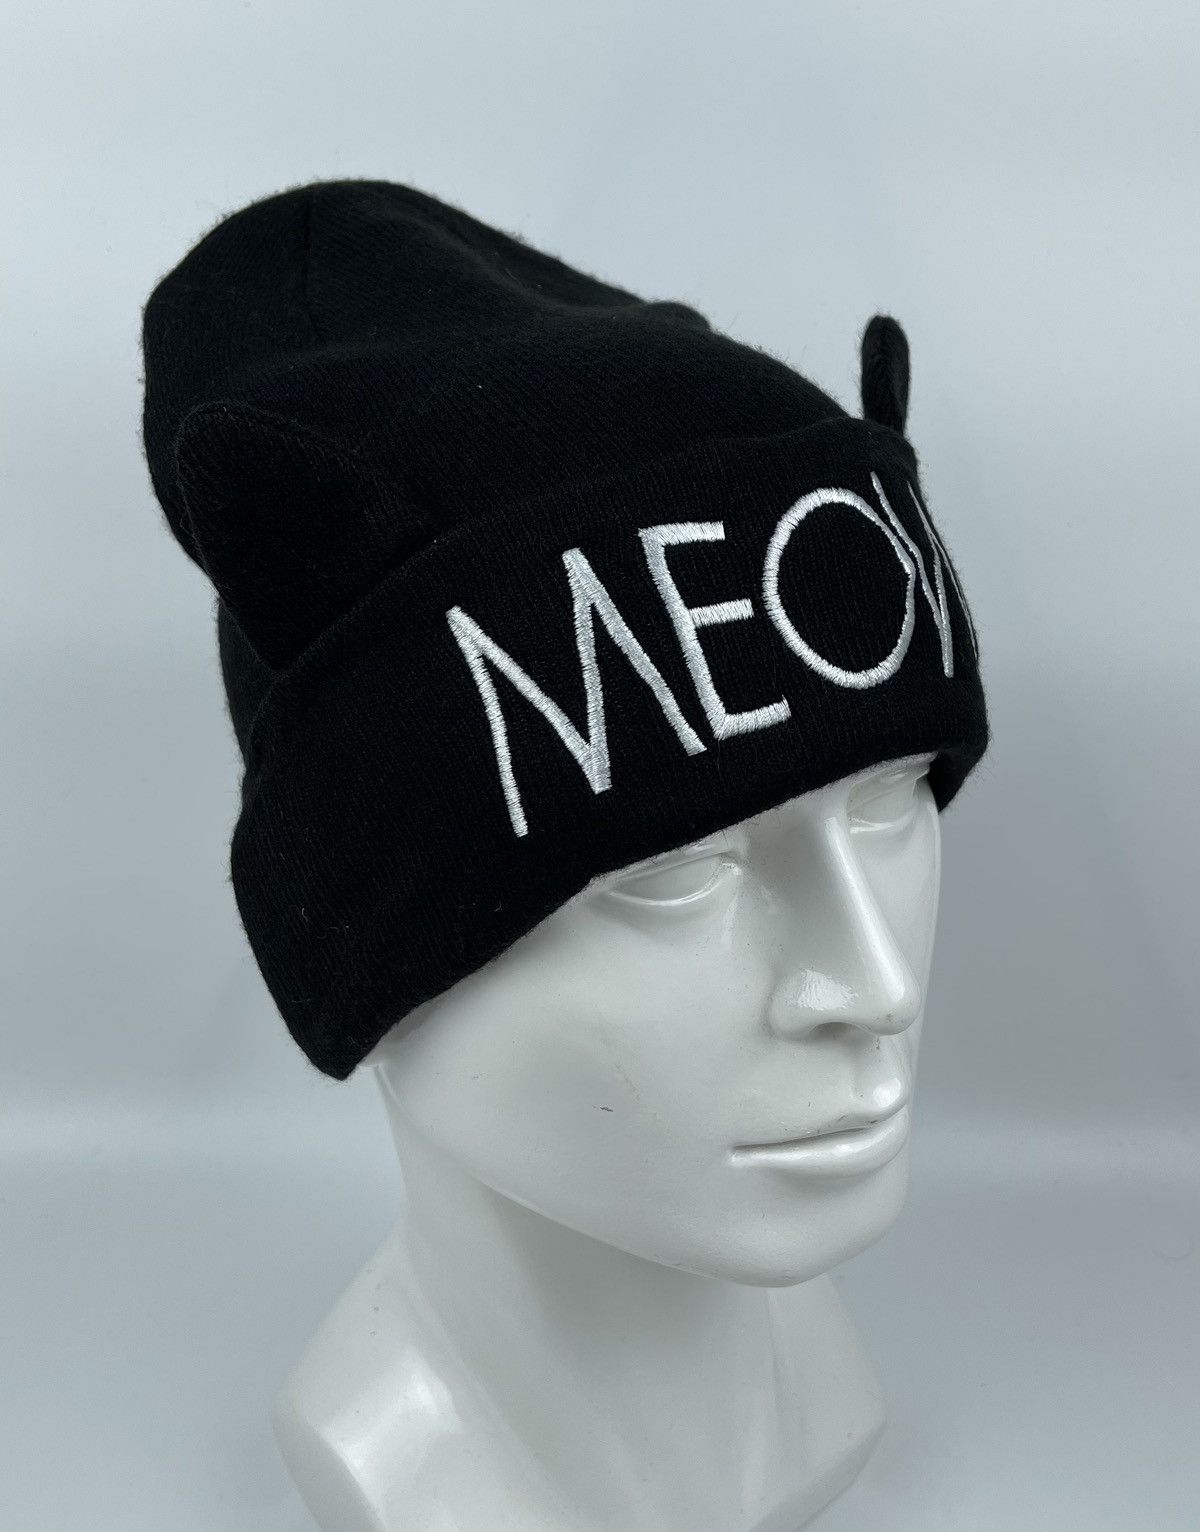 H&M - meow beanie hat with ear - 2